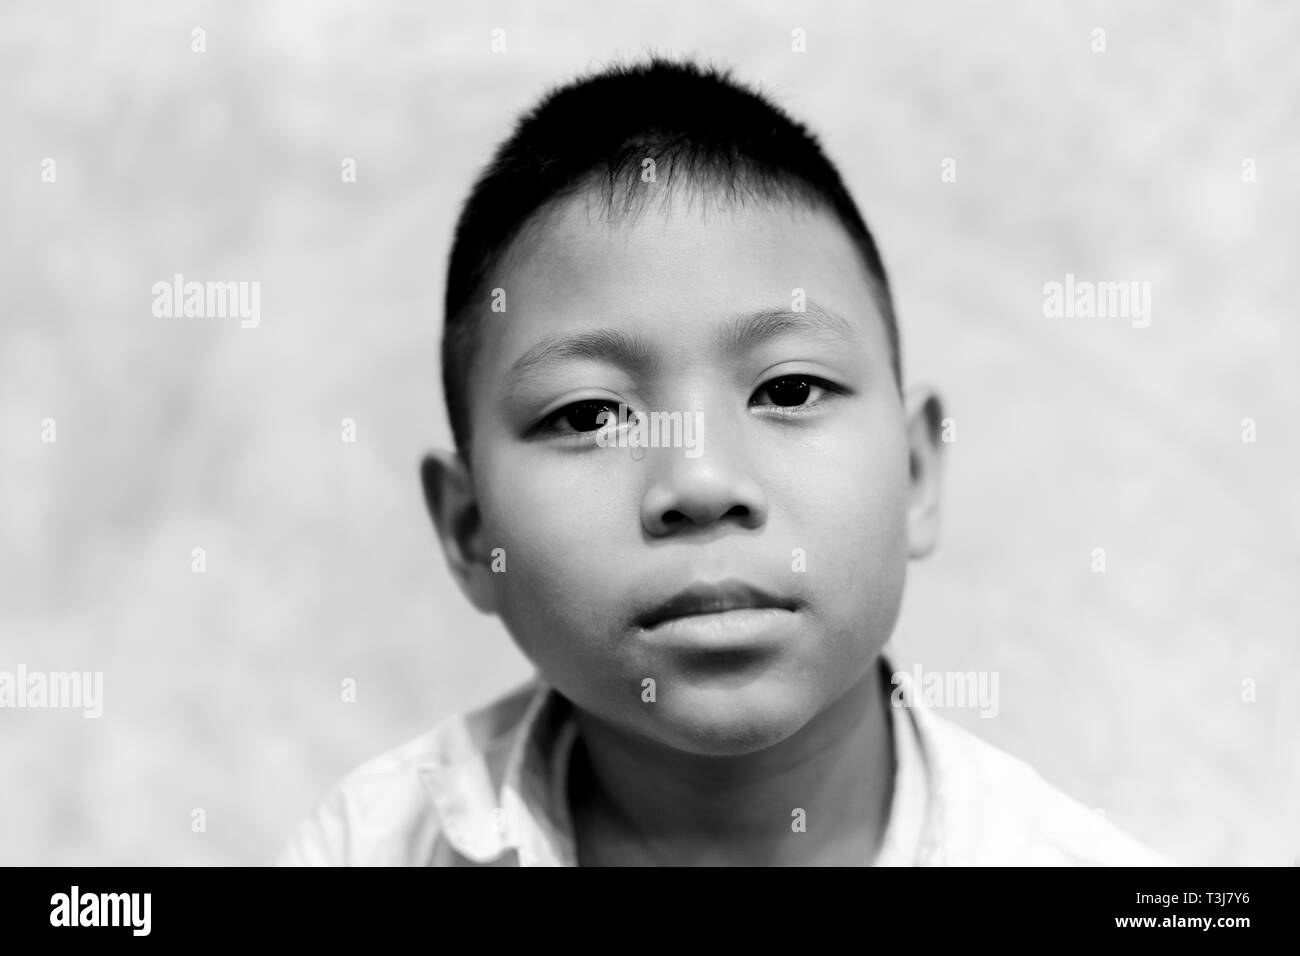 Portrait of asian boy crying with tear on his face in black and white. Stock Photo